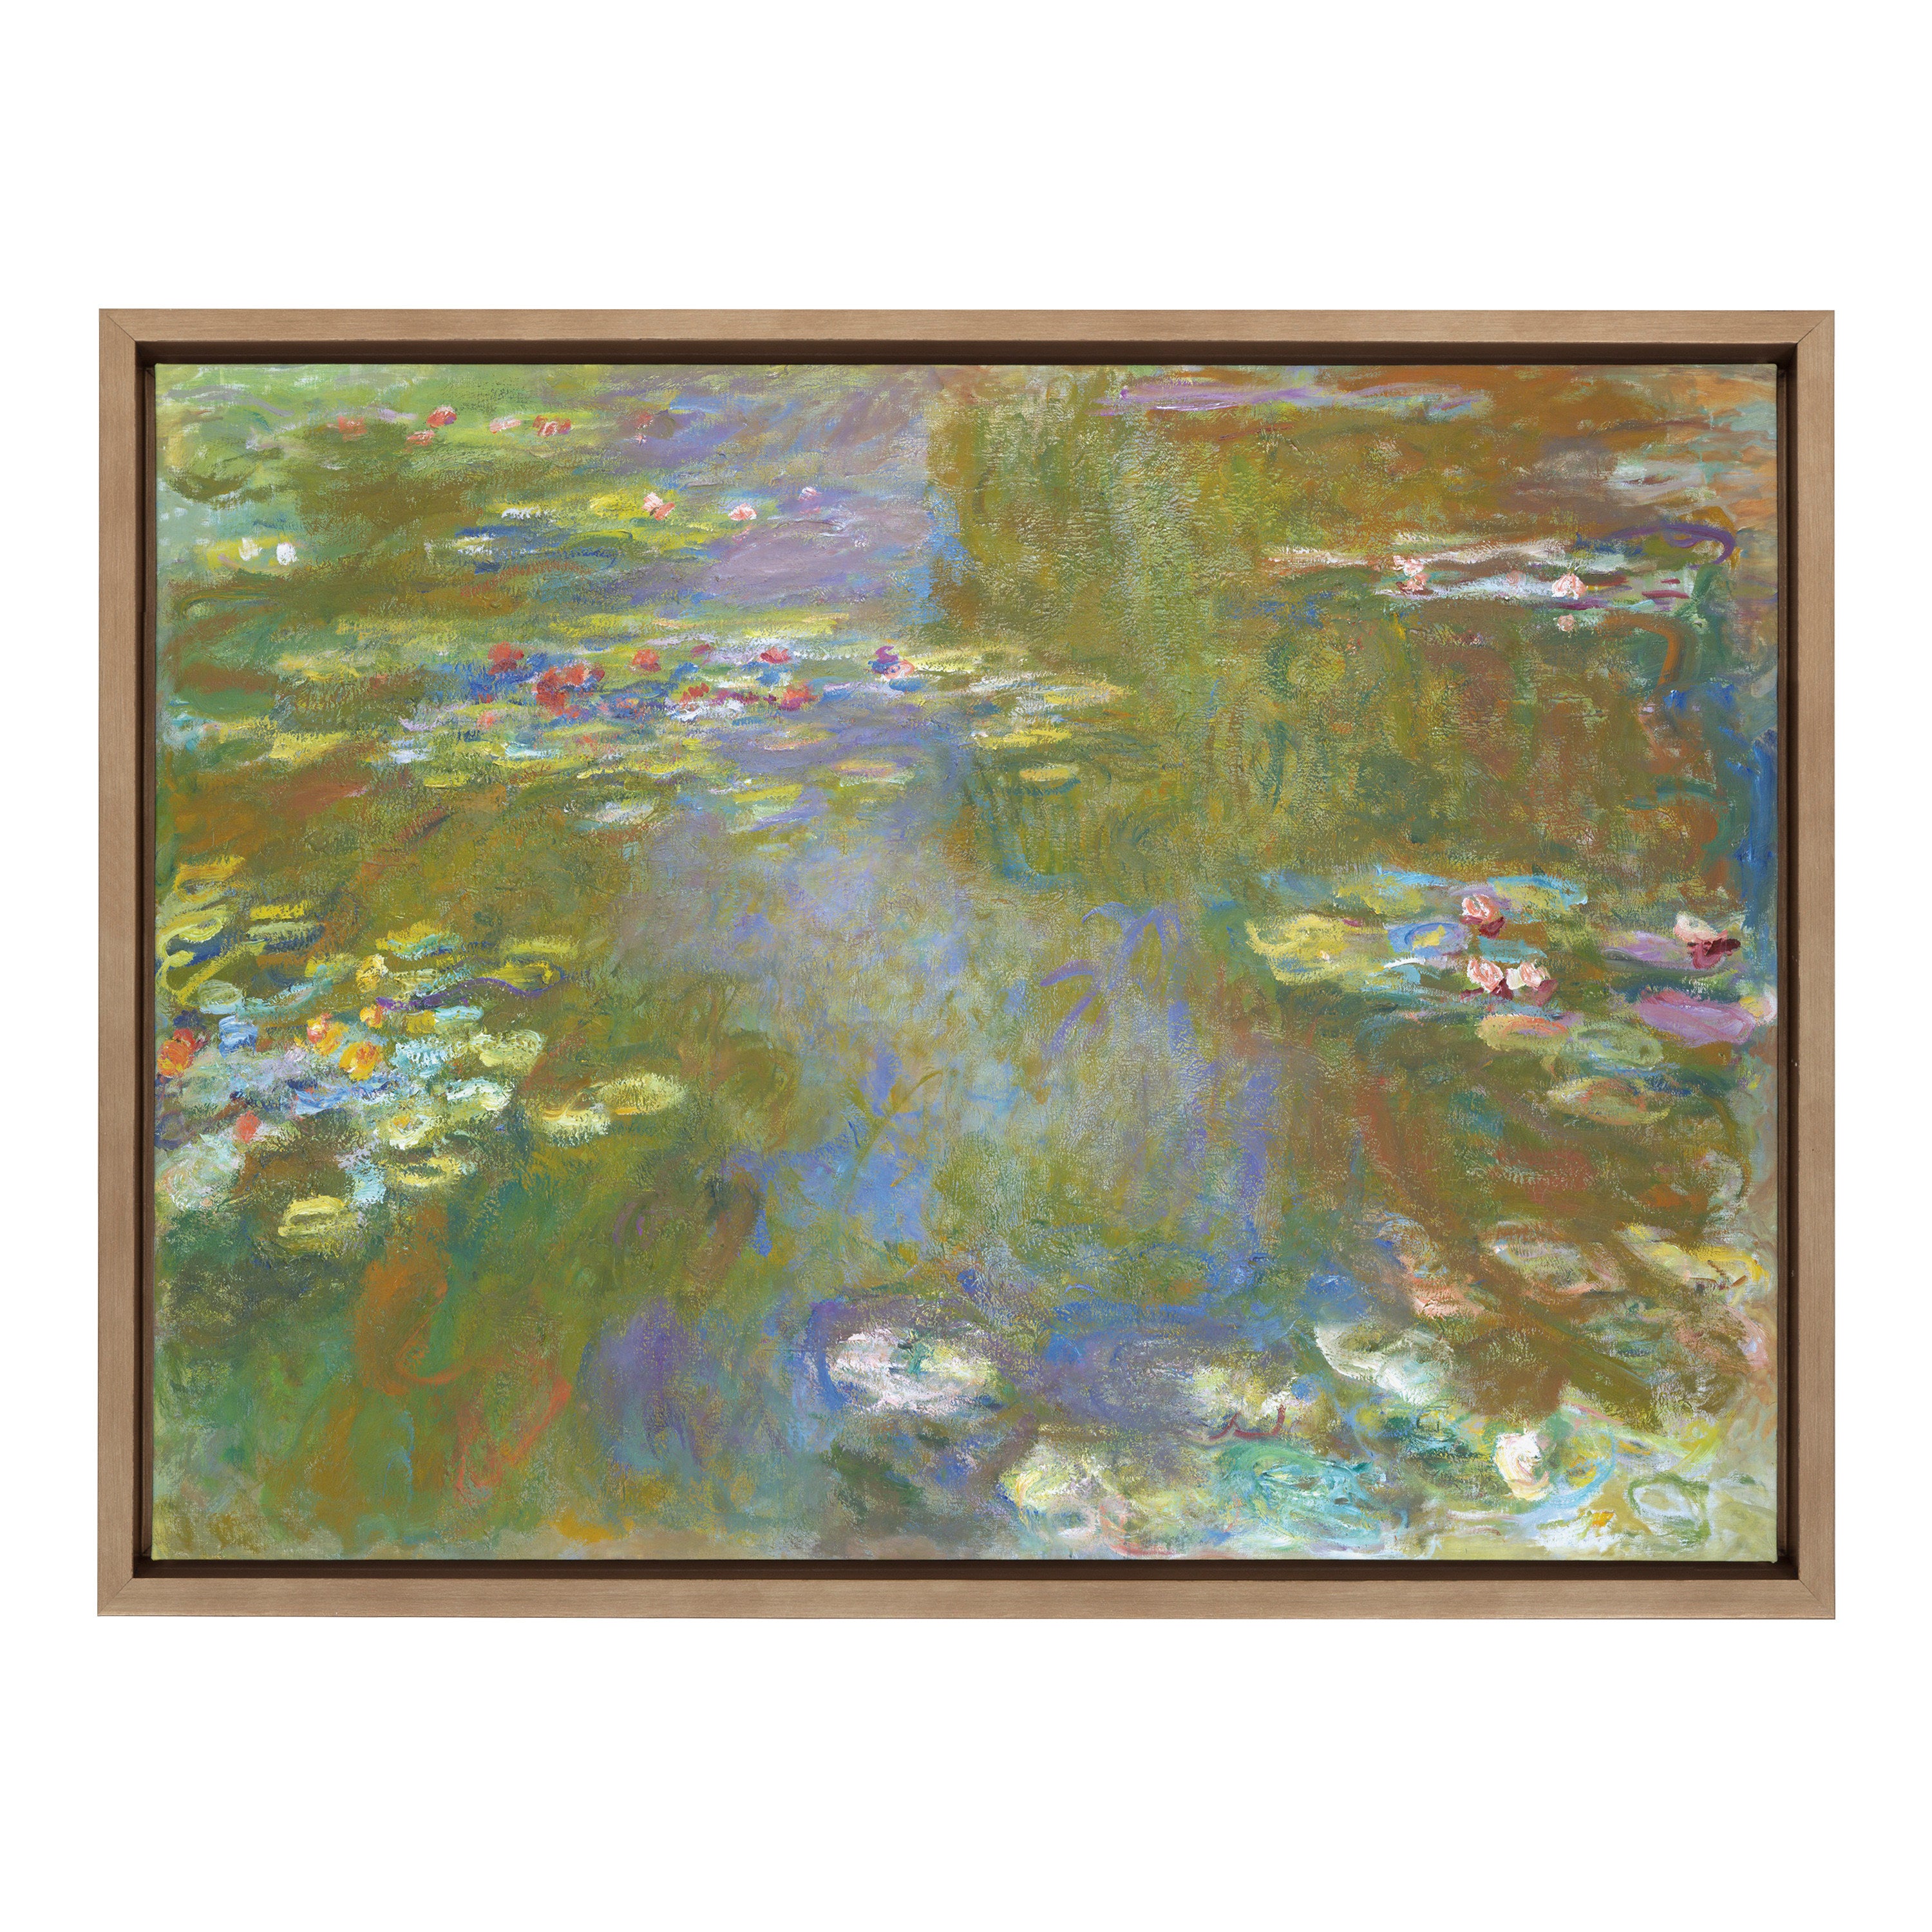 Sylvie Claude Monet Water Lily Pond 1917 19 Framed Canvas by The Art Institute of Chicago